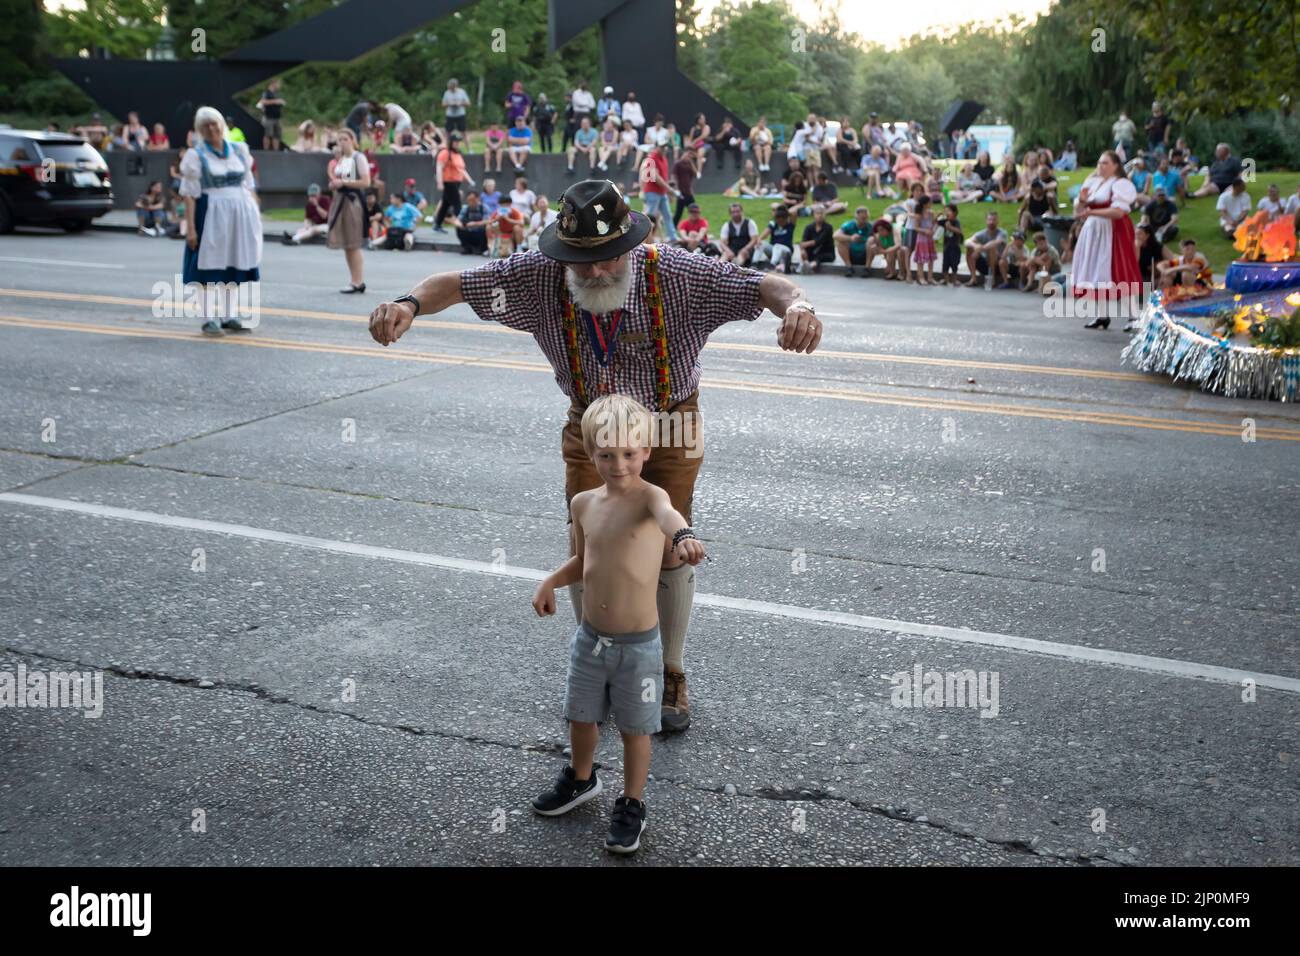 A participant in lederhosen sneaks up on a young spectator during the Seafair Torchlight Parade in Seattle on Saturday, July 30, 2022. Stock Photo